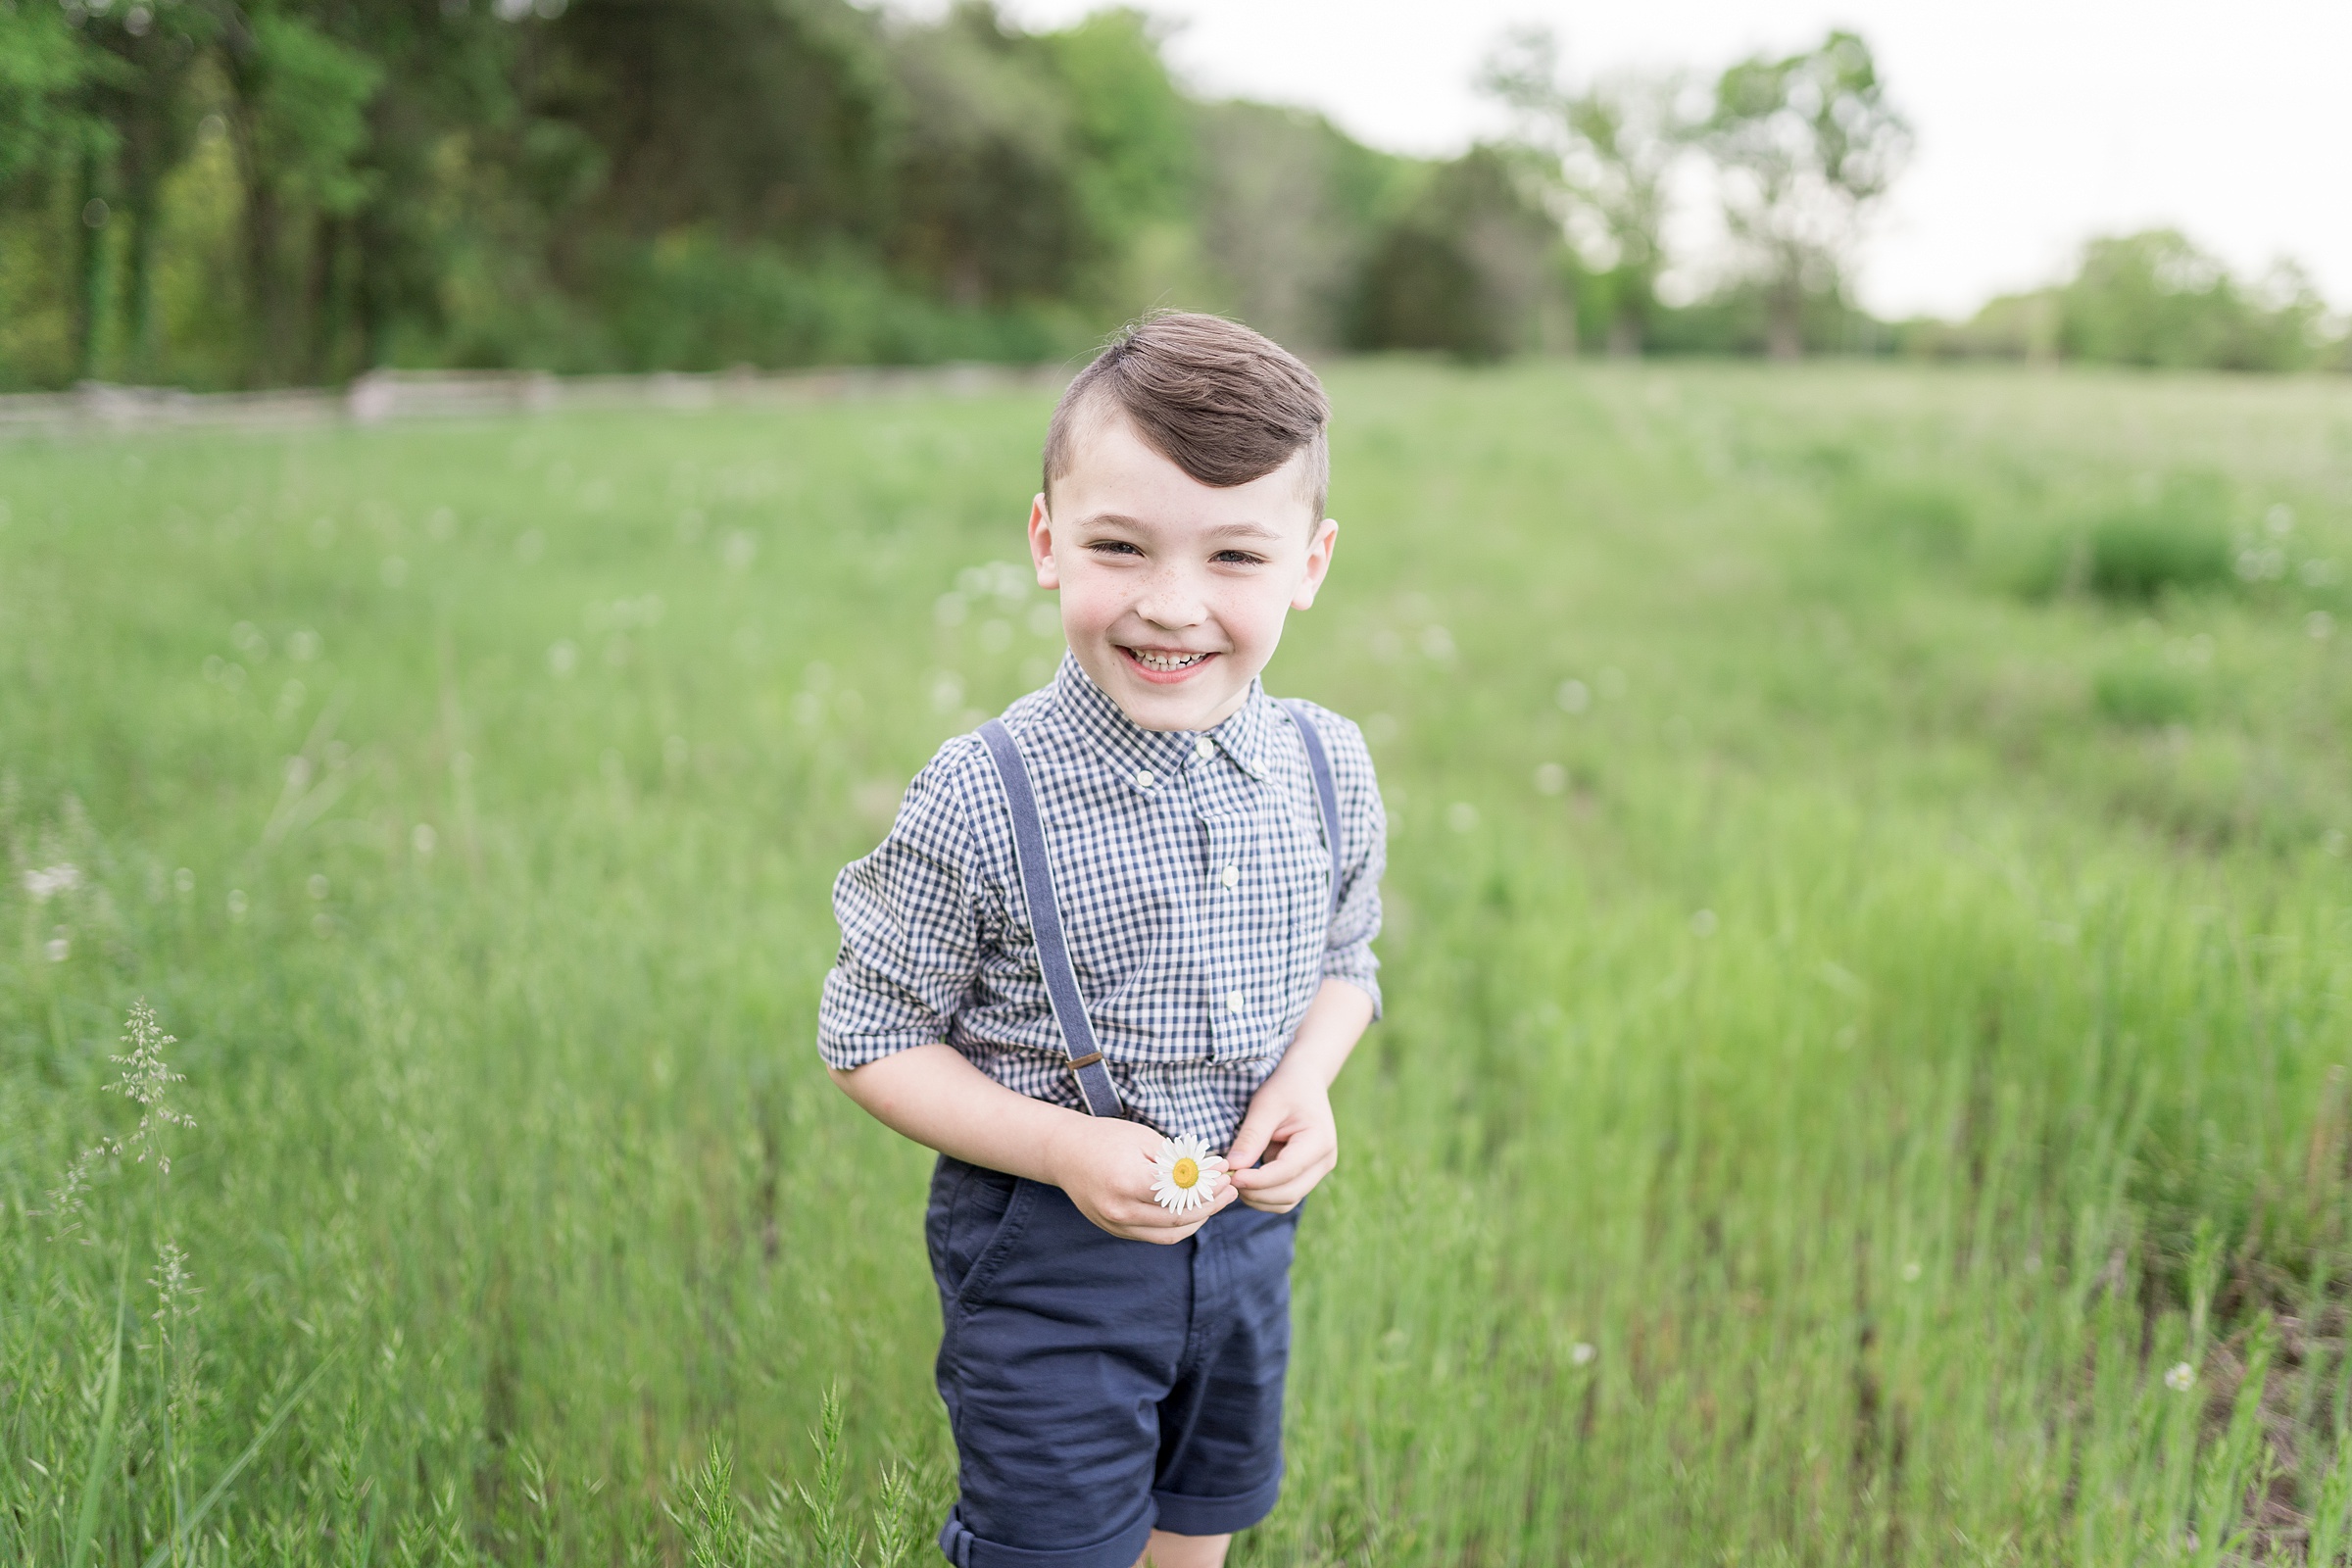 older brother poses for photo in grass